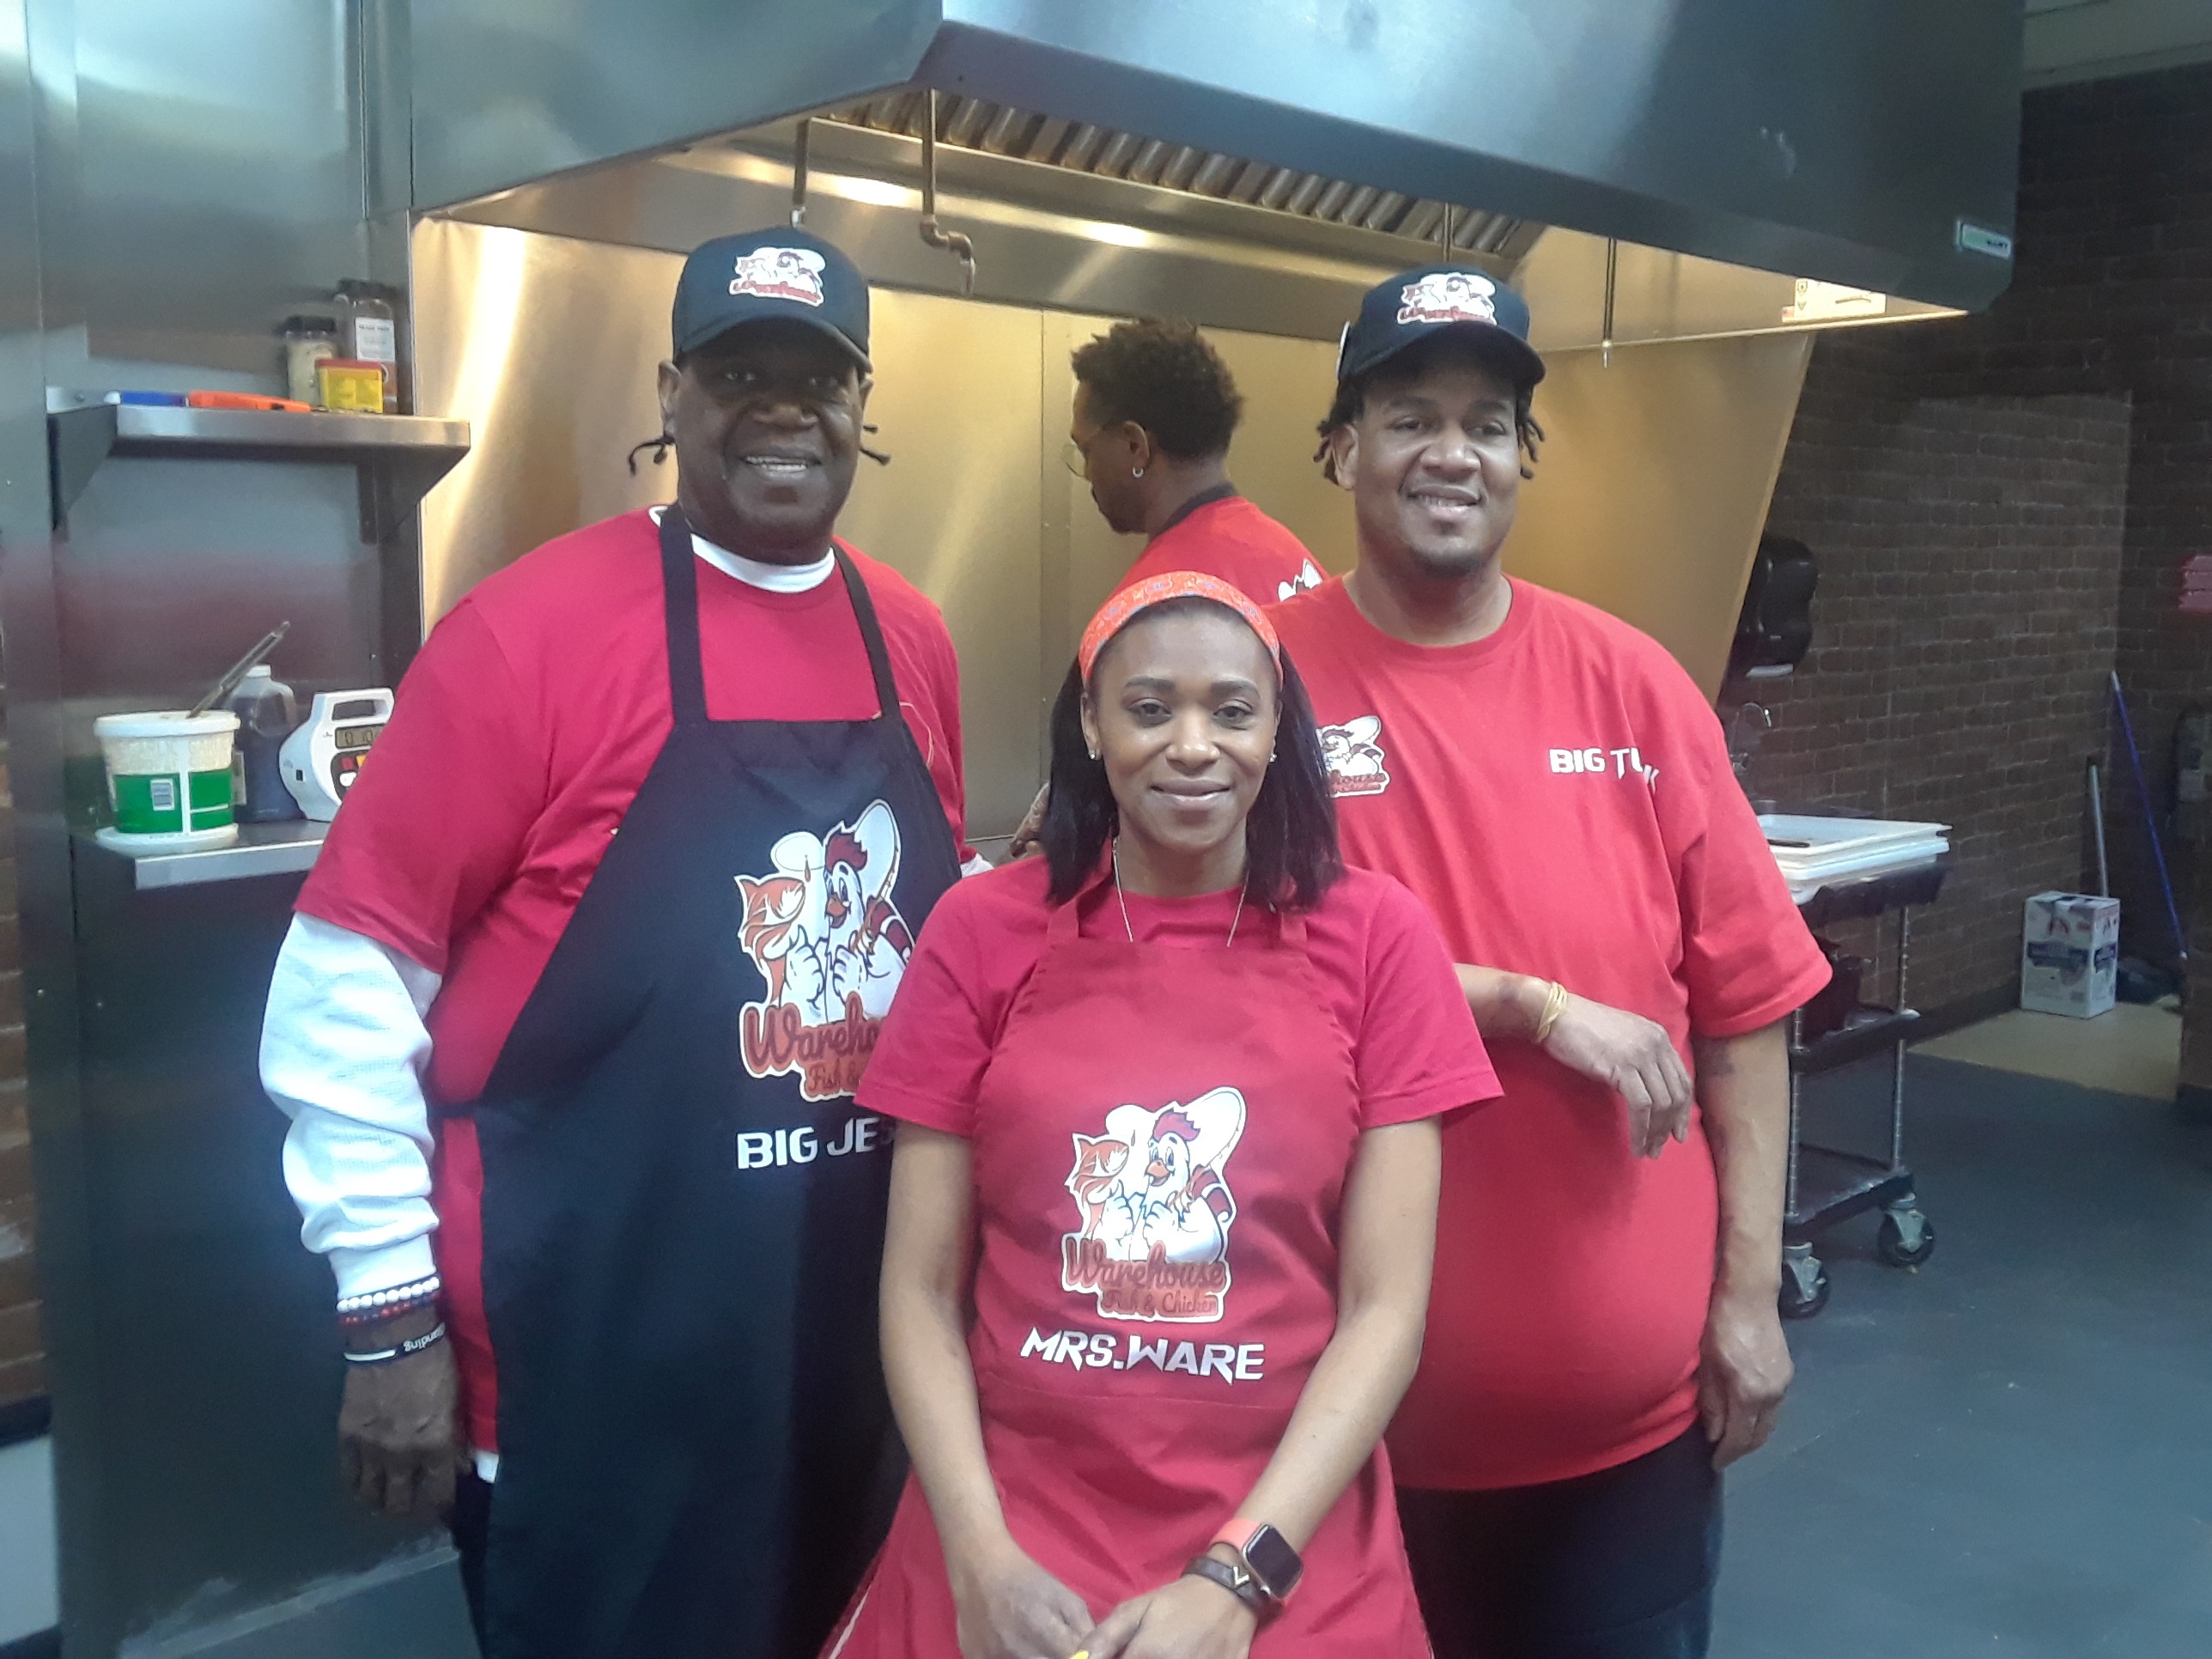 Owners of new Warehouse Fish & Chicken takeout seek to make everyone a part  of their family fish fry 